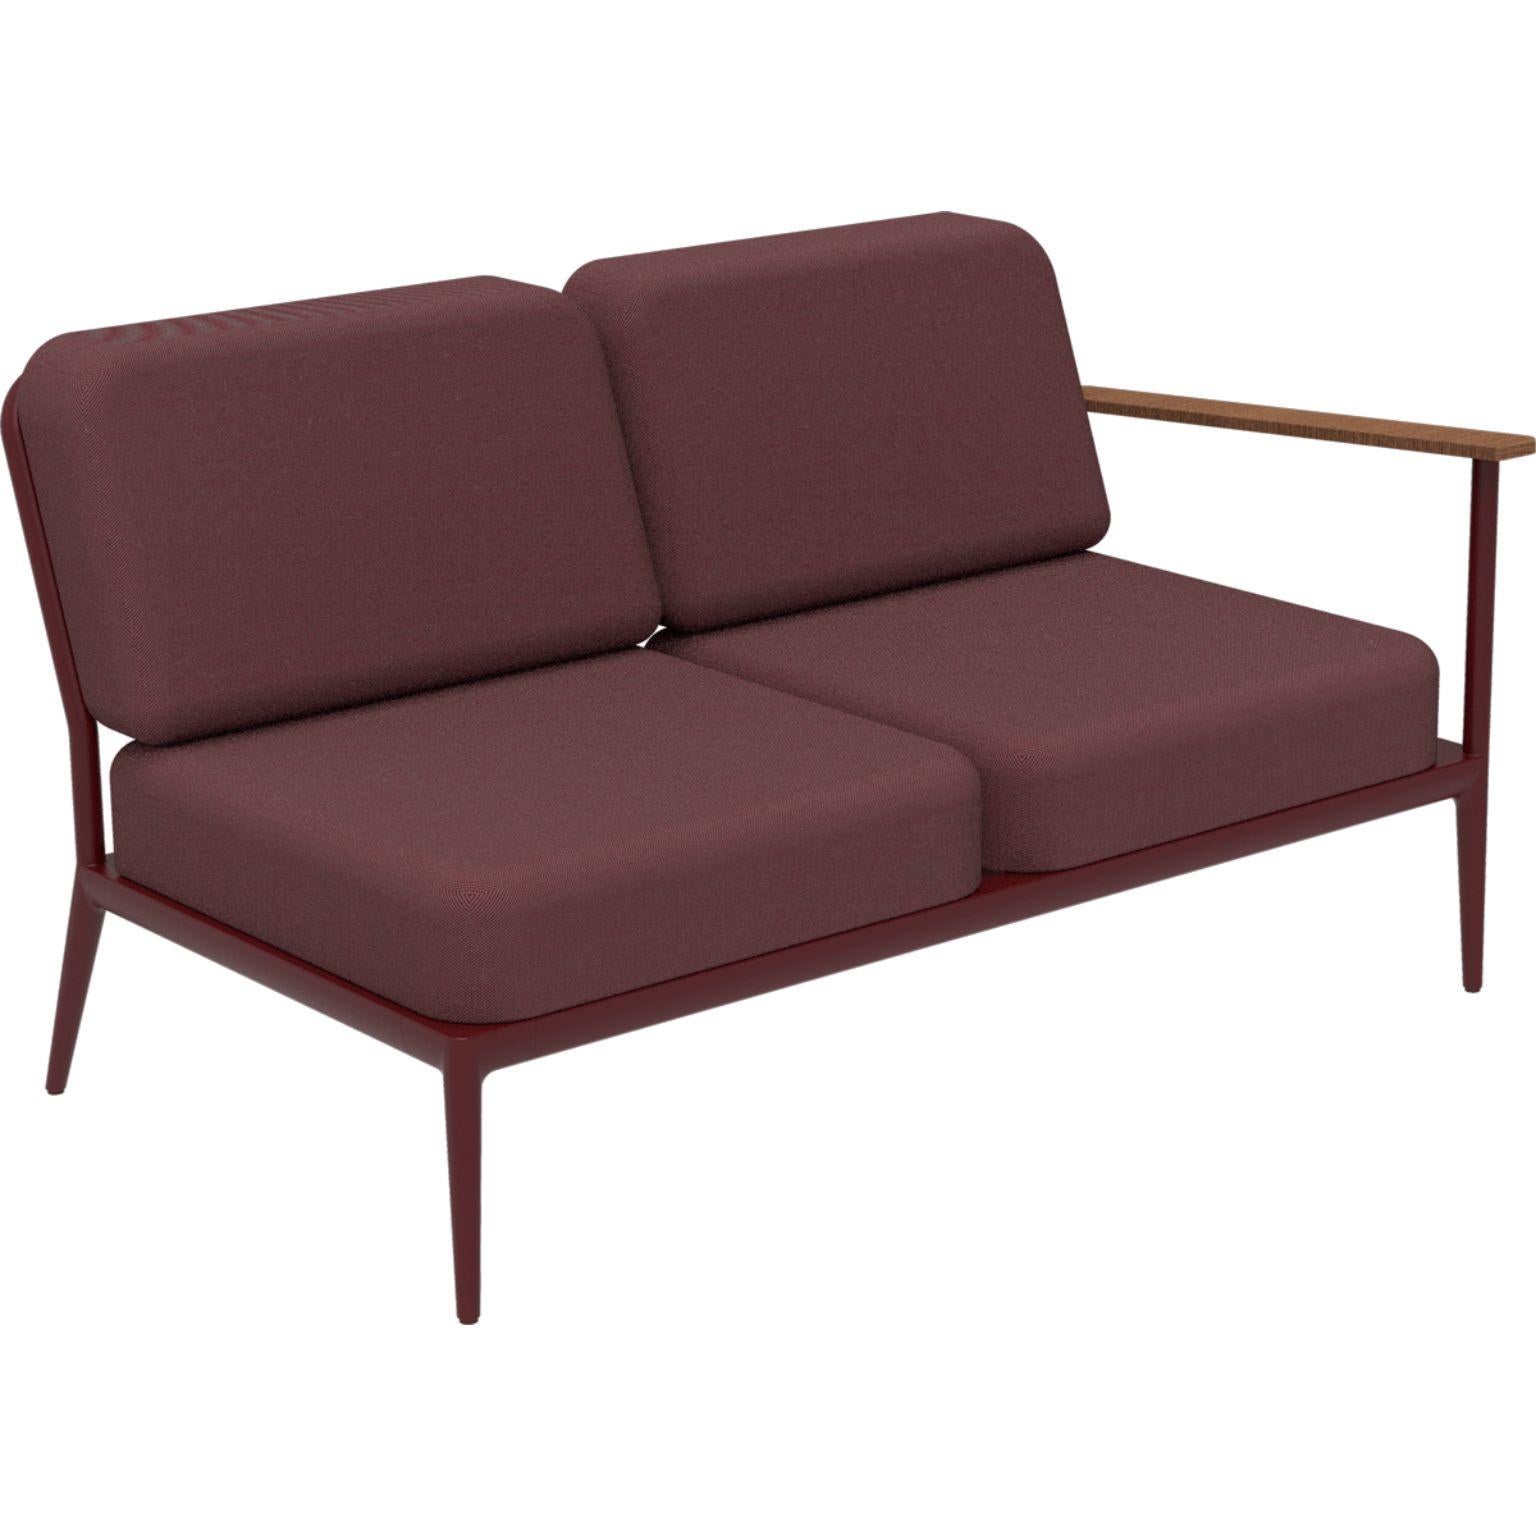 Nature Burgundy Double Left modular sofa by MOWEE
Dimensions: D85 x W144 x H81 cm (seat height 42 cm).
Material: Aluminum, upholstery and Iroko Wood.
Weight: 29 kg.
Also available in different colors and finishes.

An unmistakable collection